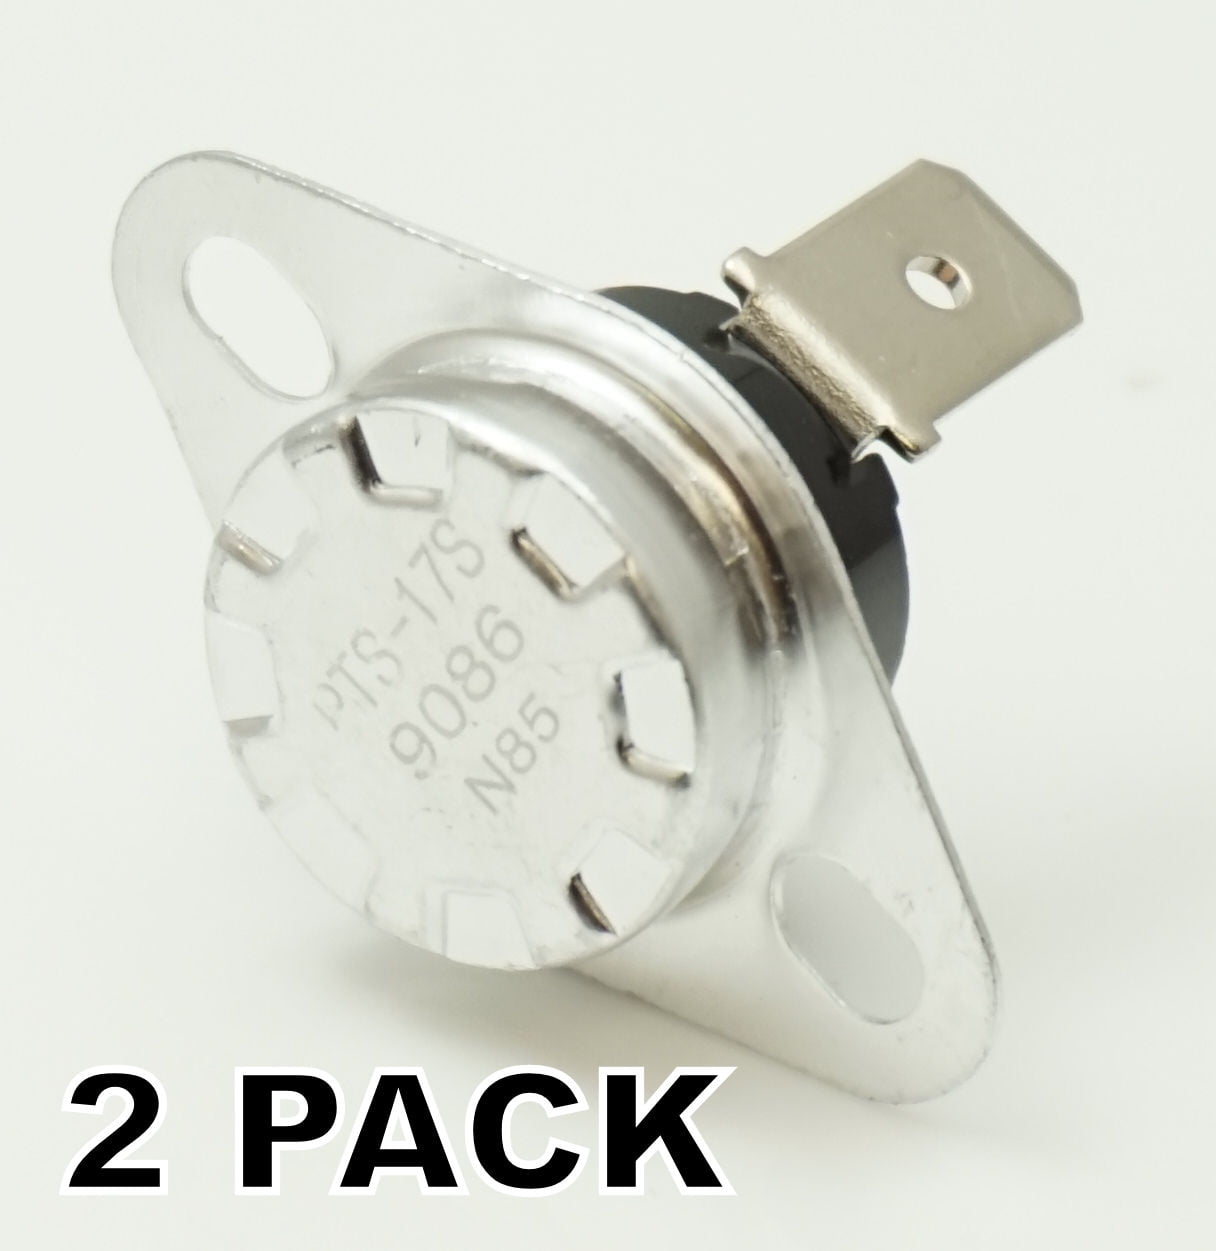 2 PACK DC47-00015A Dryer Thermal Thermostat Fuse AP4201892 fits Samsung 2 PACK 